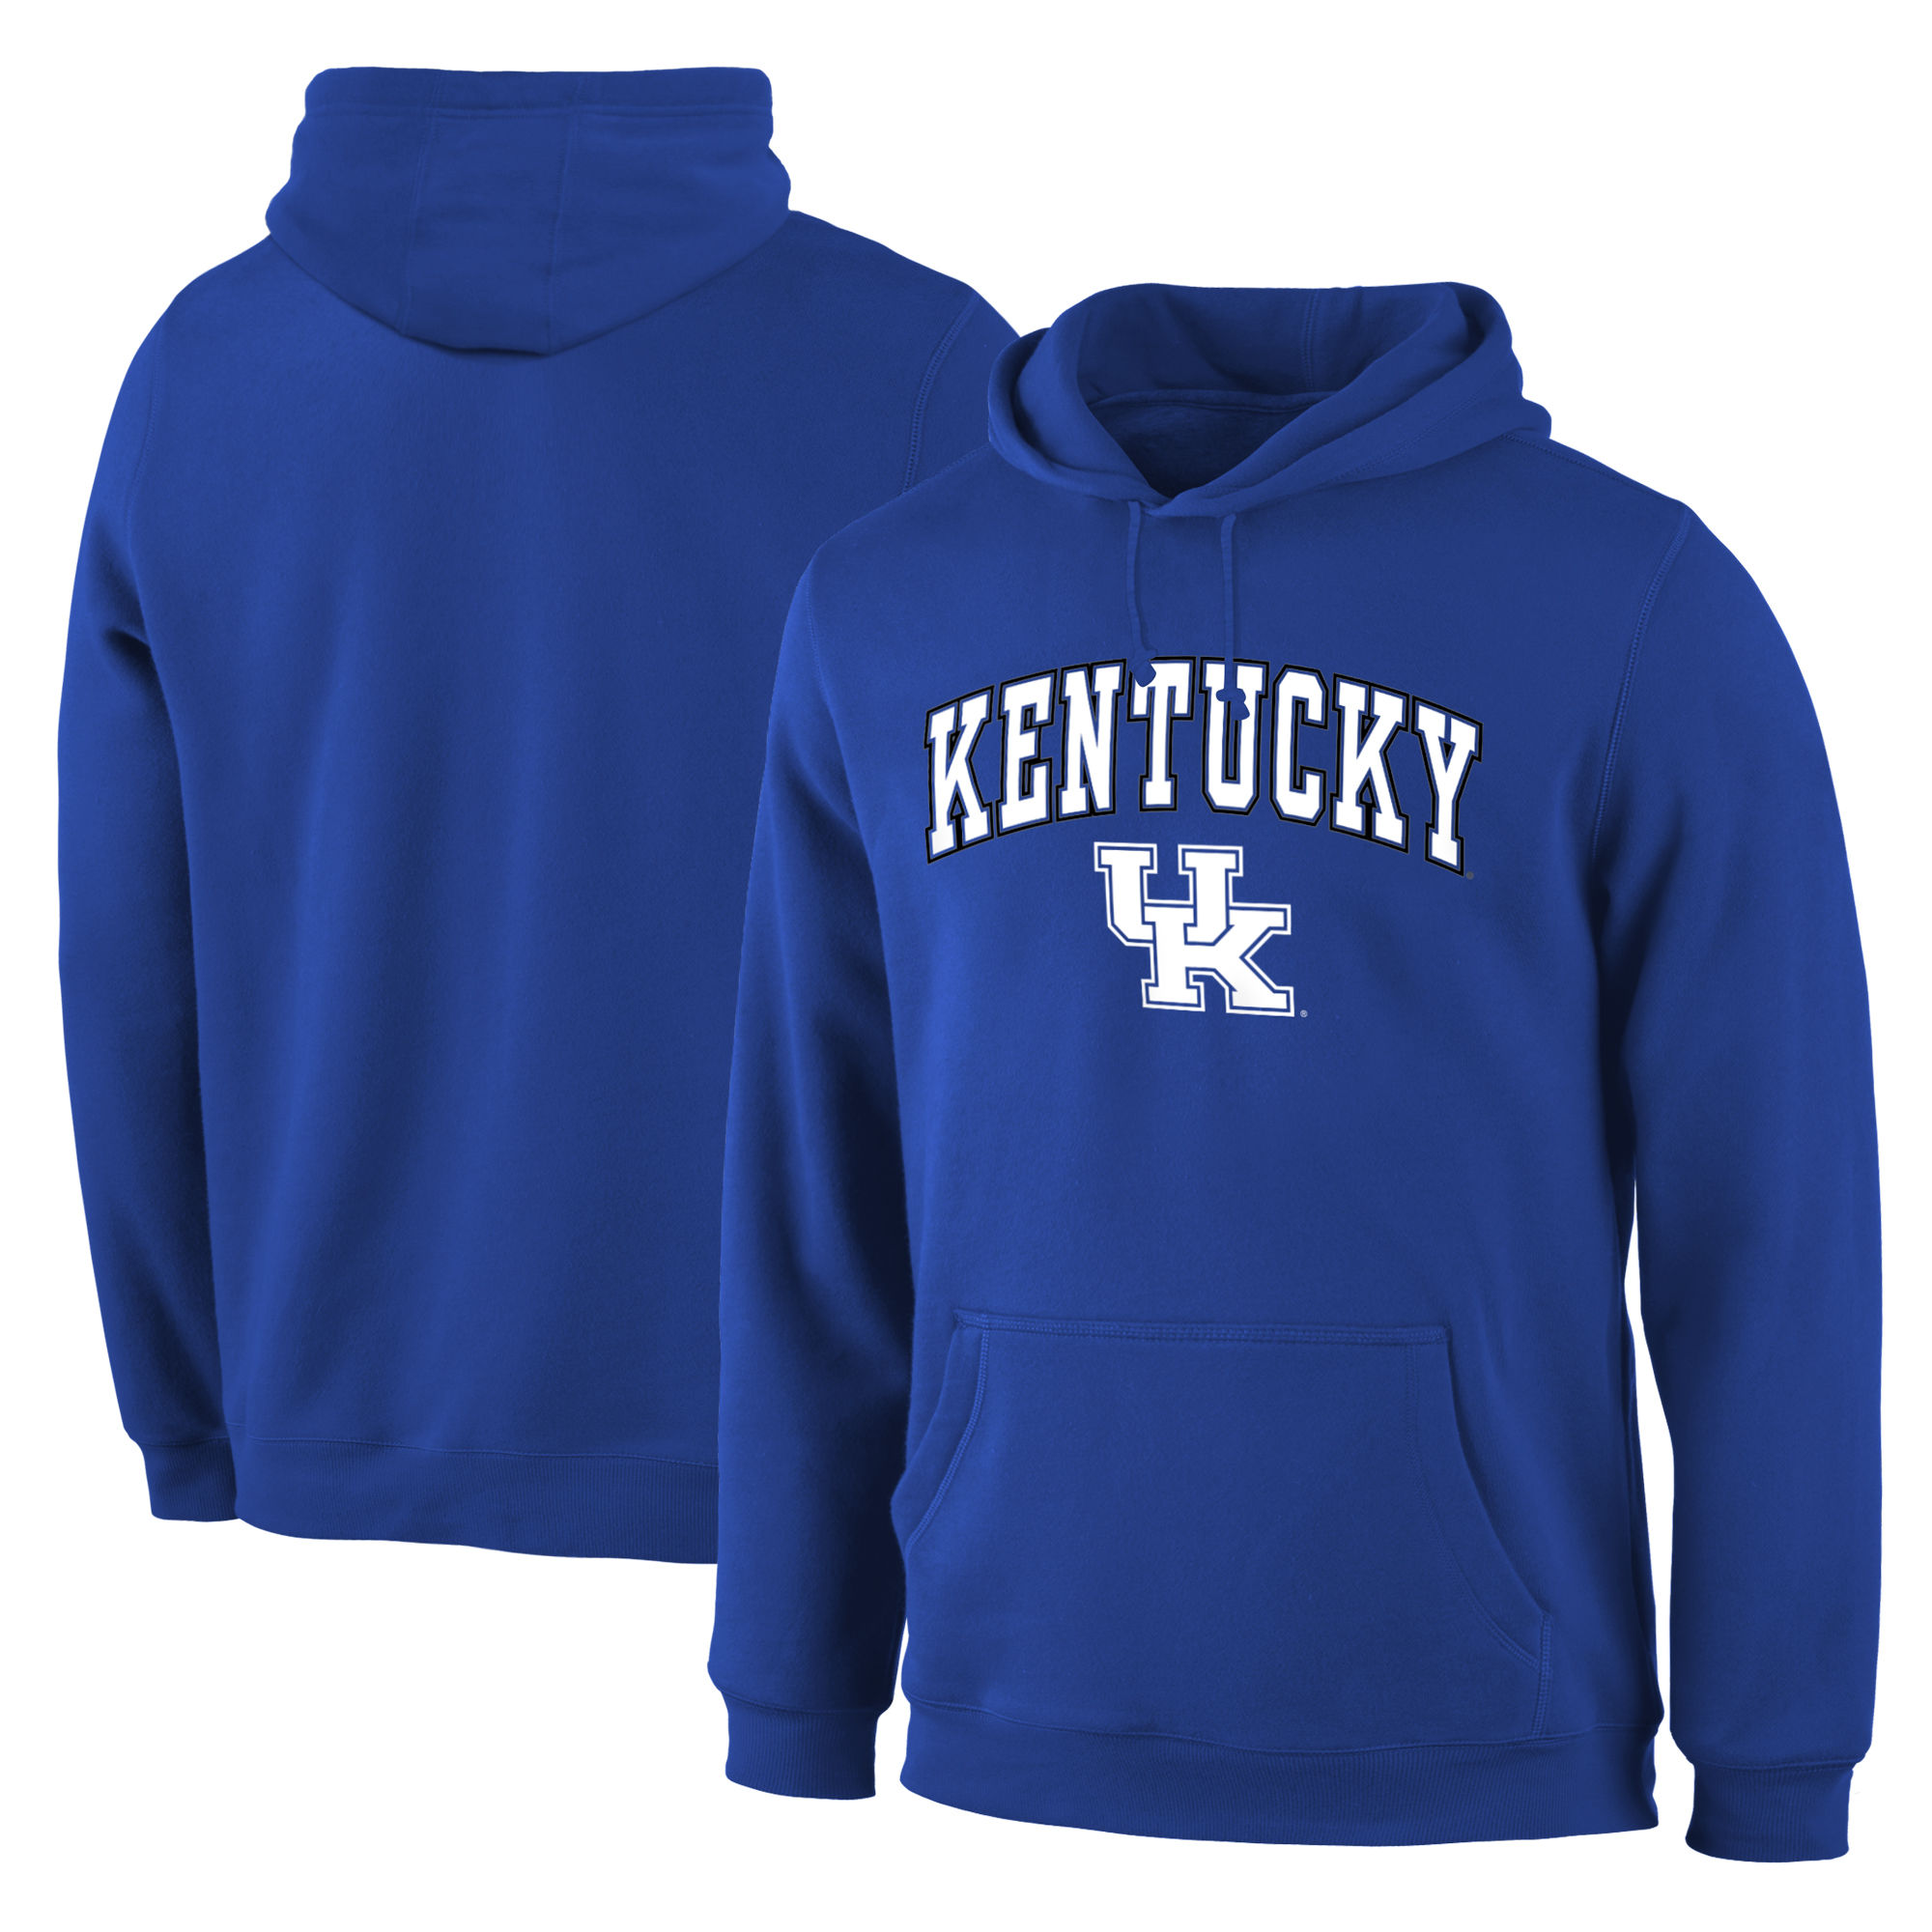 Kentucky Wildcats Royal Campus Pullover Hoodie